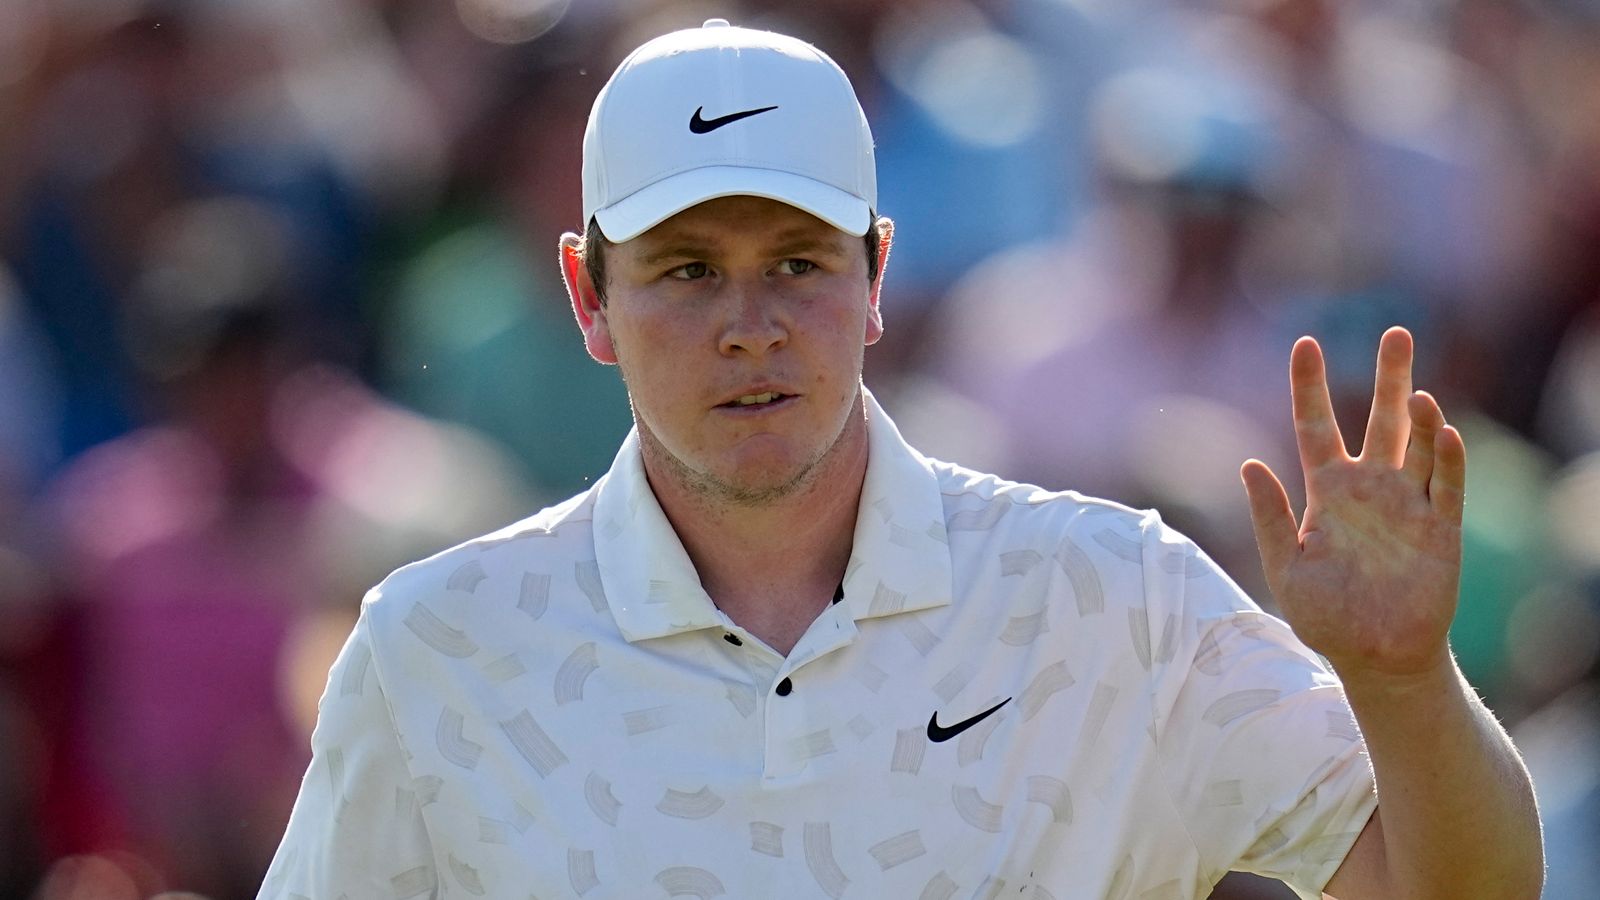 Canadian Open Robert MacIntyre leads as Rory McIlroy fades at halfway